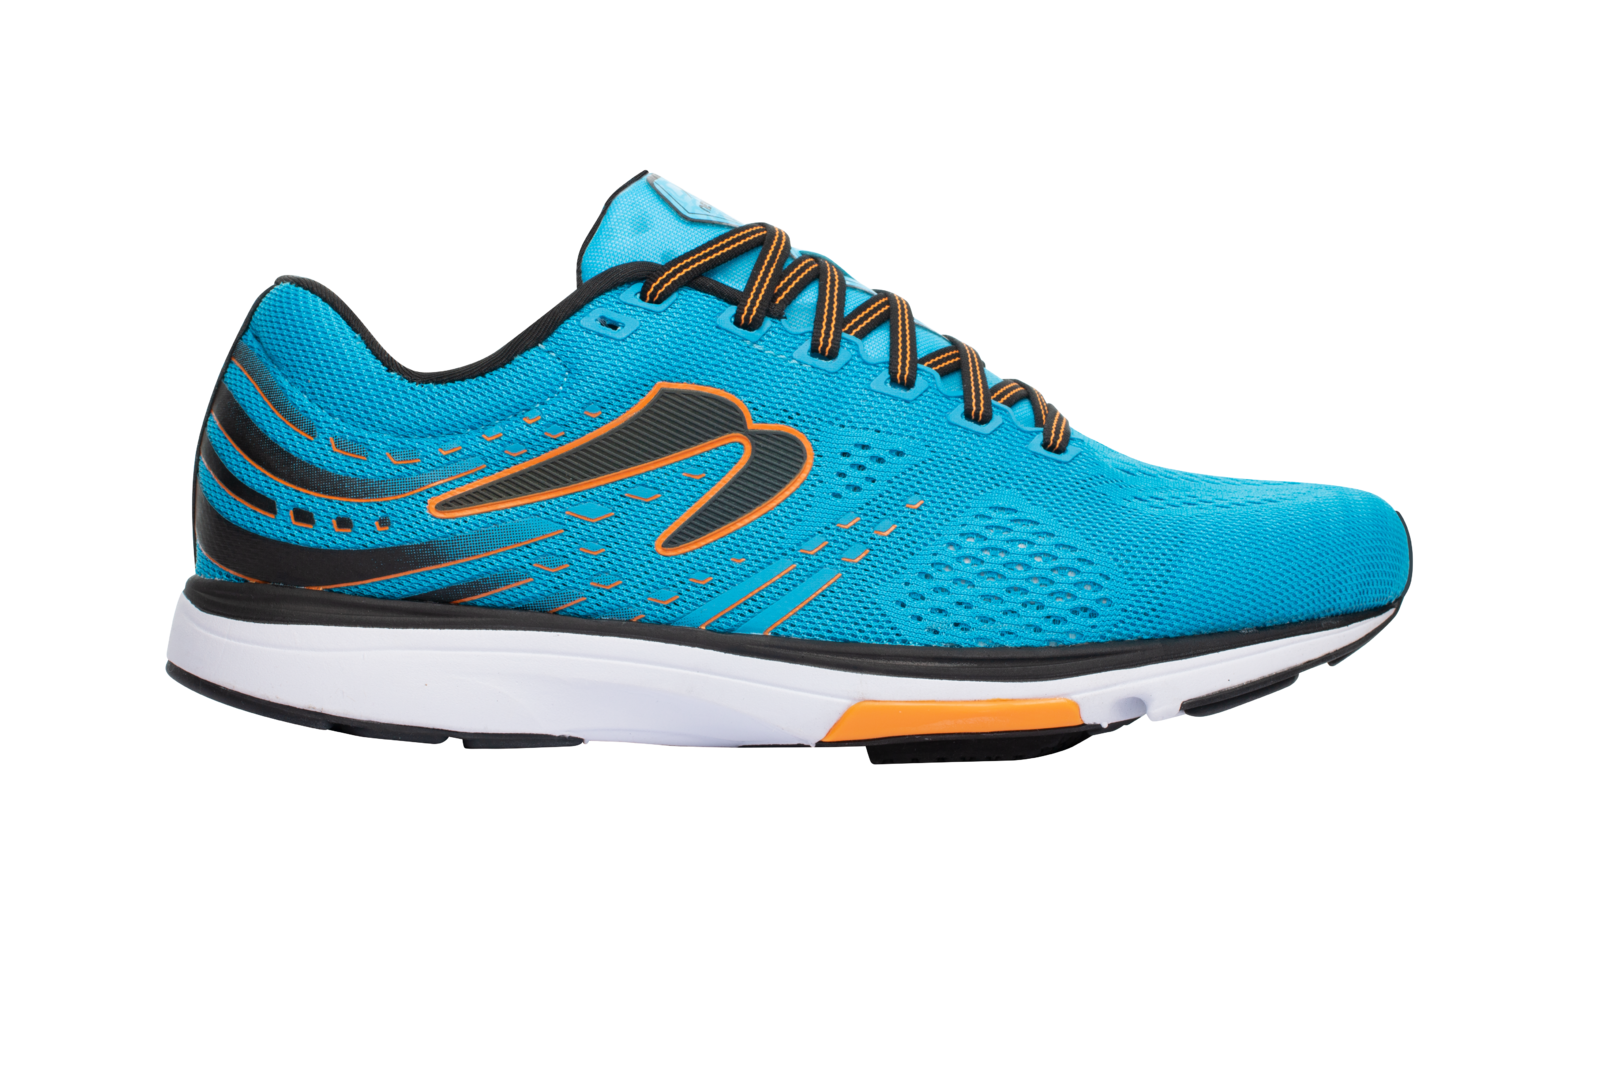 Newton Mens Fate 7 Running Shoes Runners Sneakers - Blue/Black